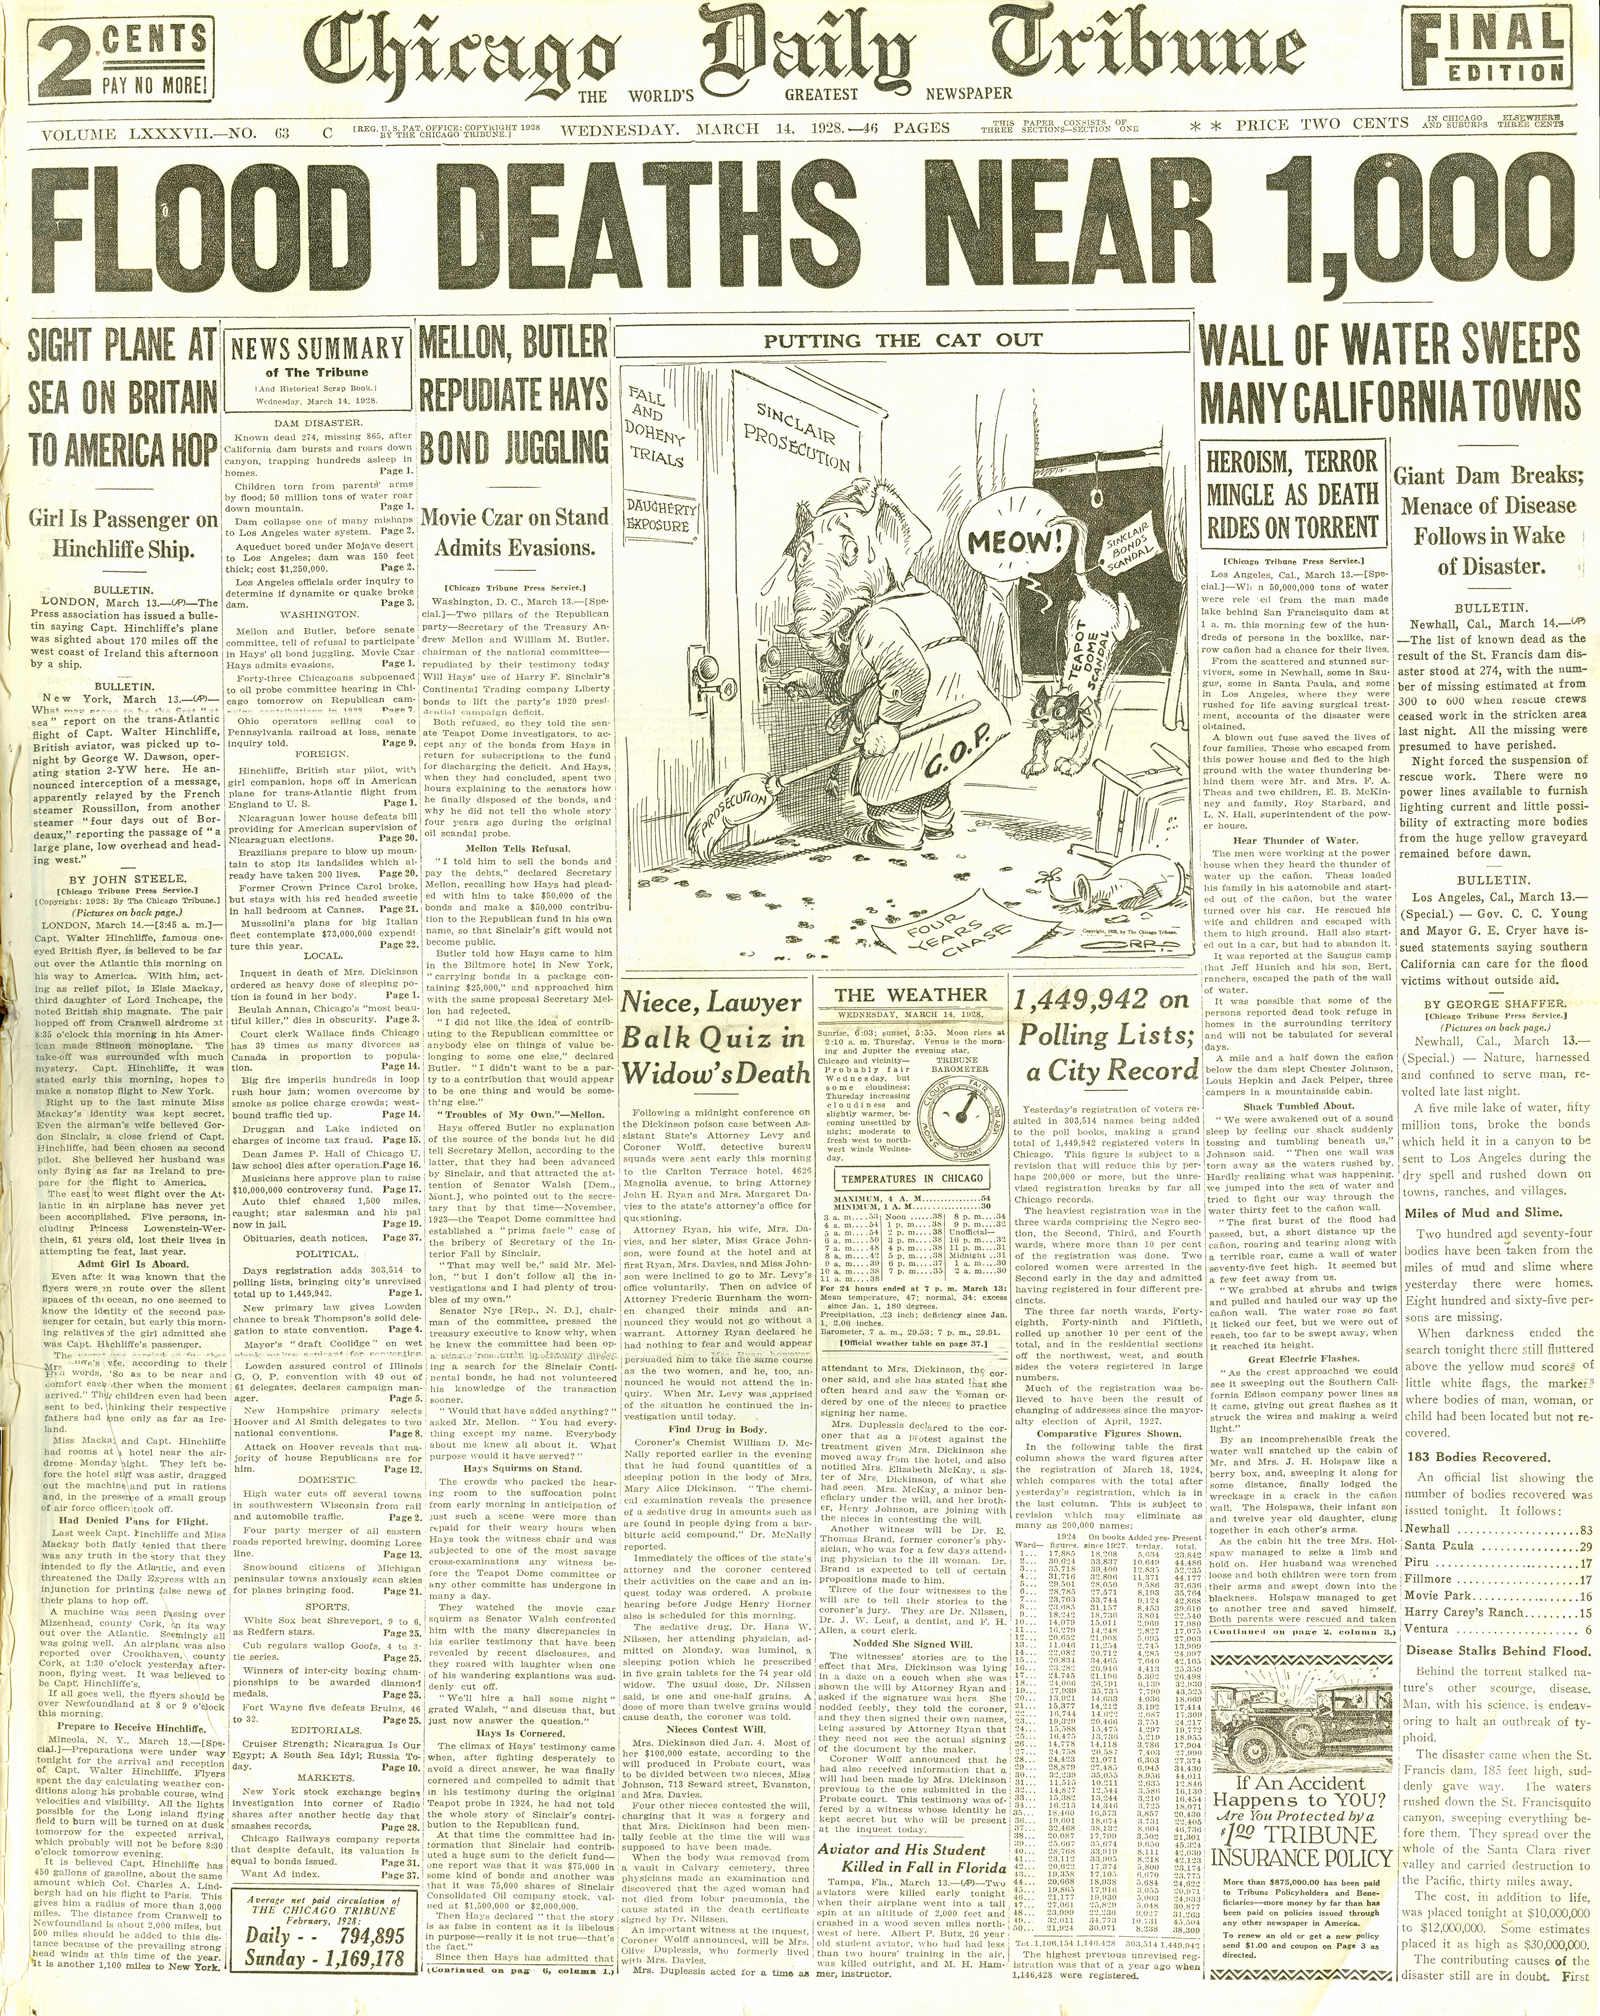 St. Francis Dam Disaster.

CHICAGO DAILY TRIBUNE (NEWSPAPER),

WEDNESDAY, MARCH 14, 1928